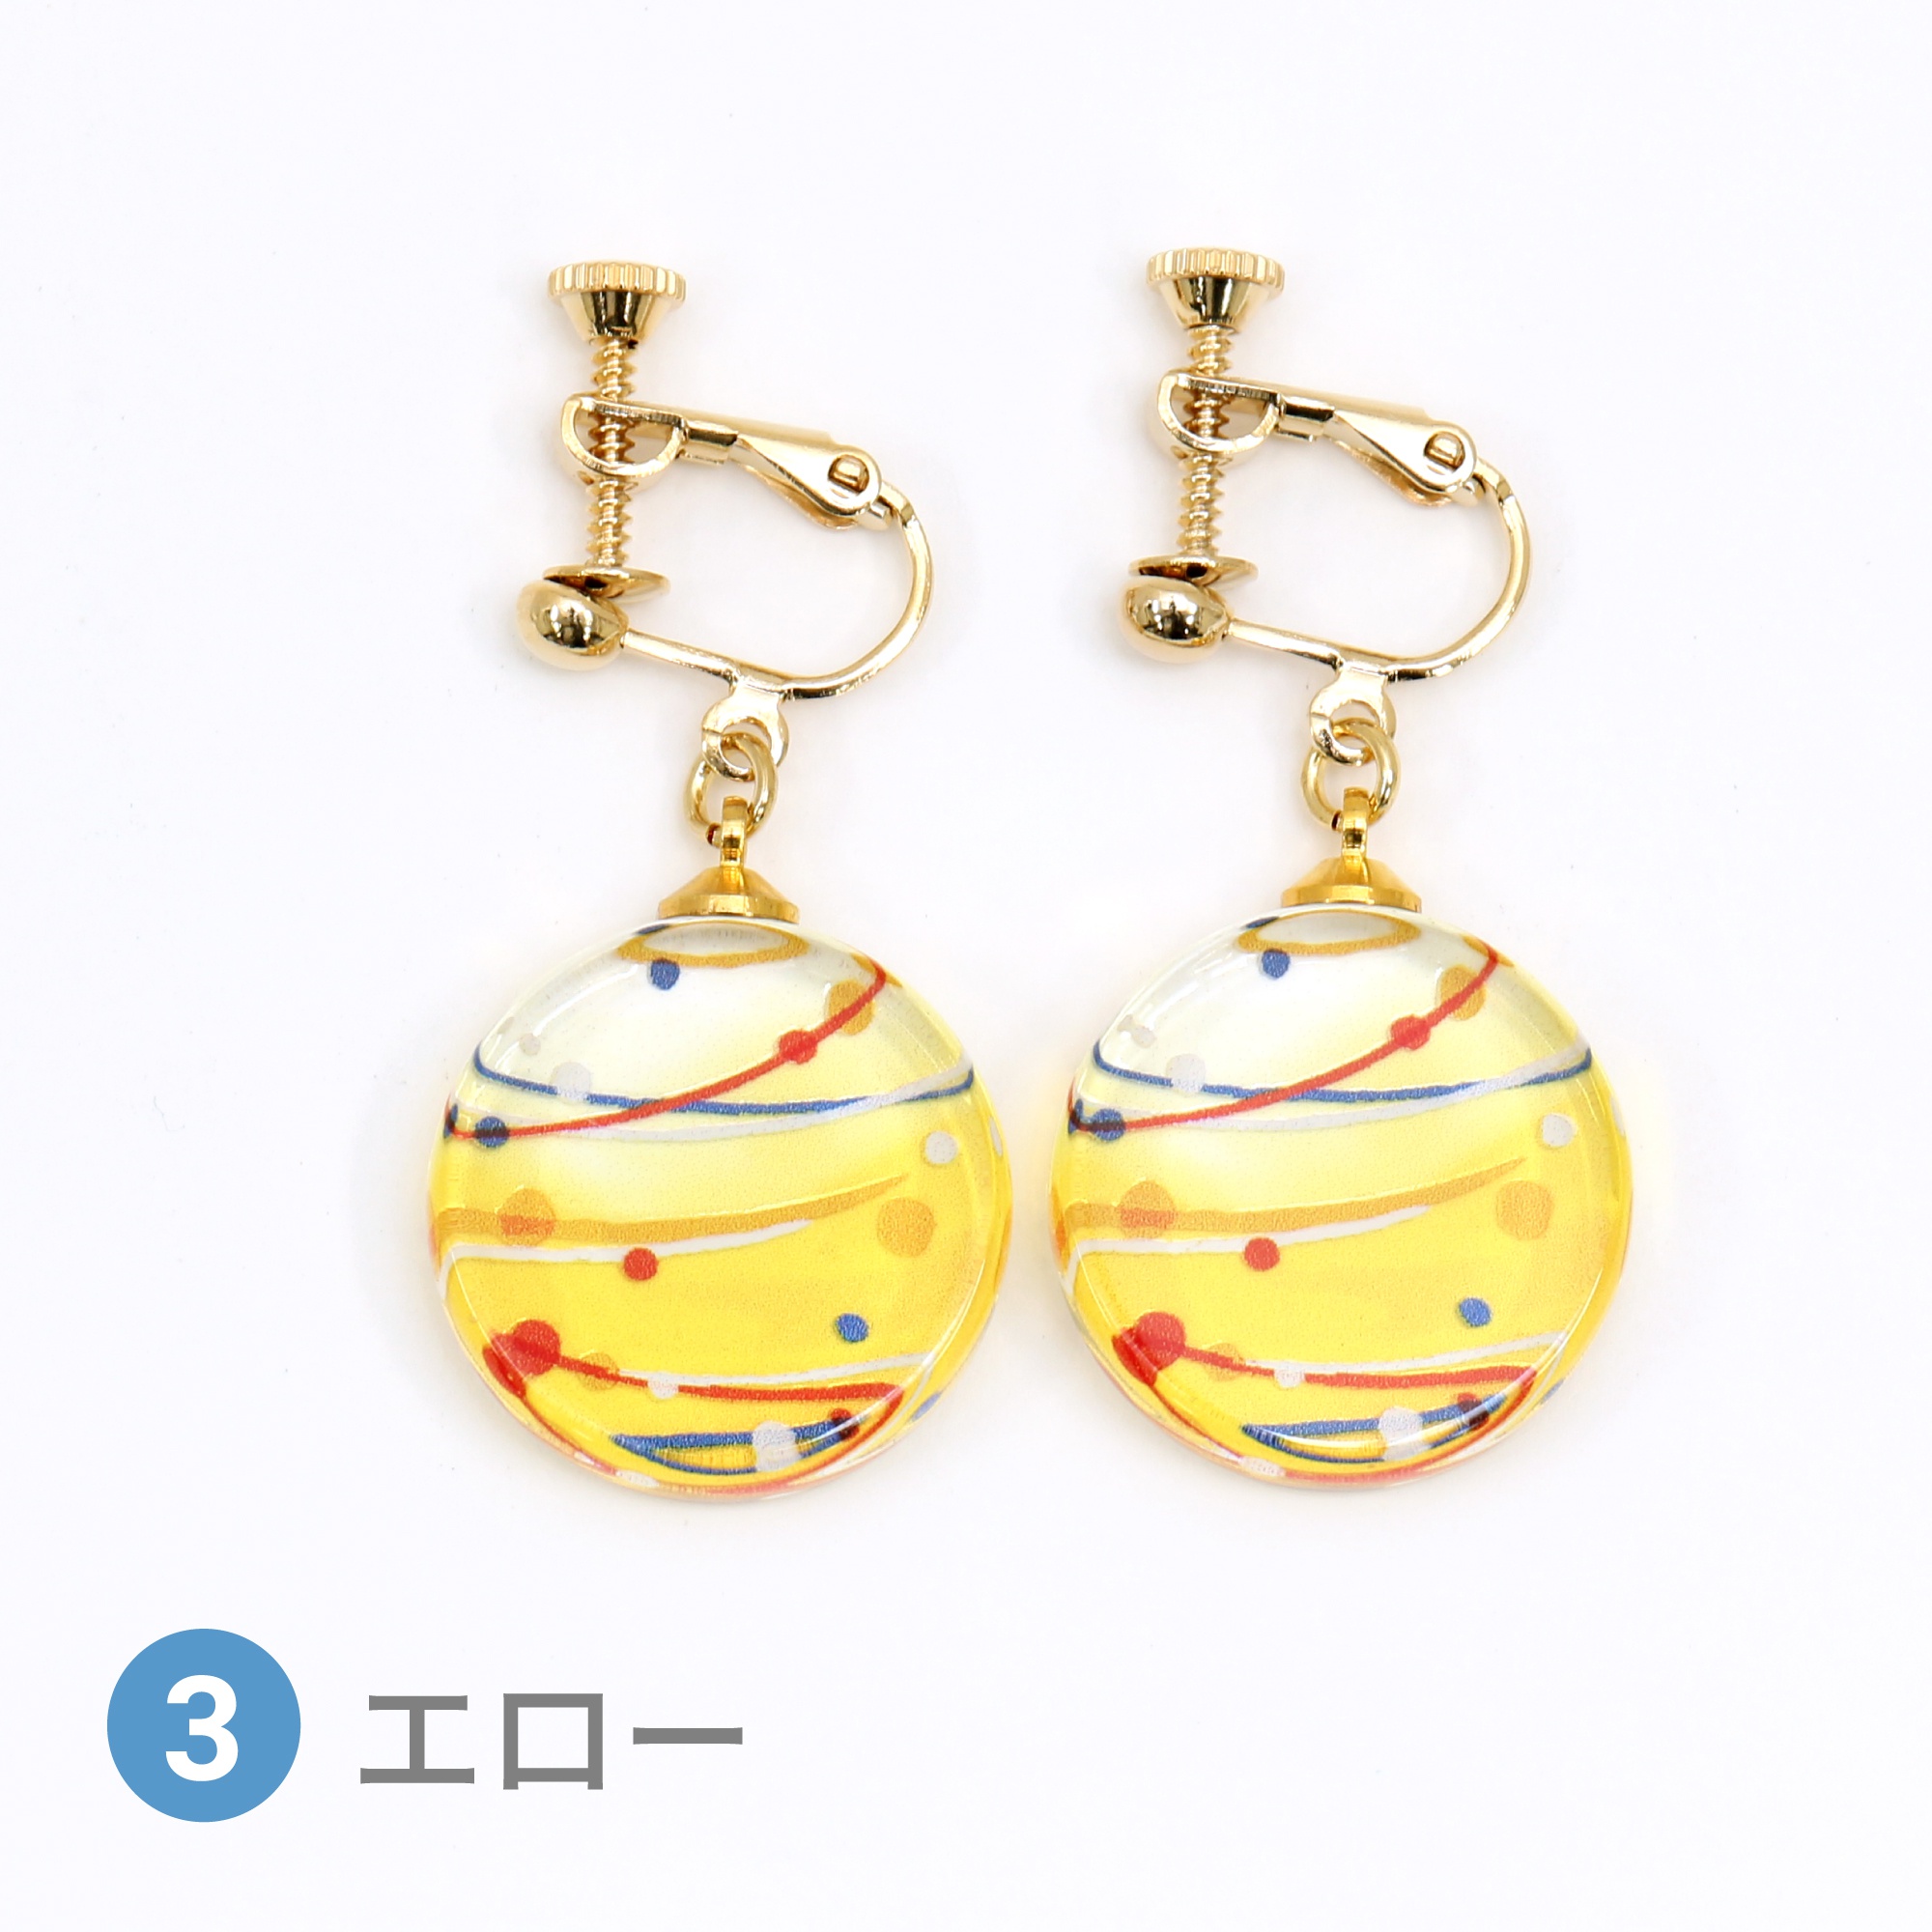 Glass accessories Earring WATER BALLOON yellow round shape